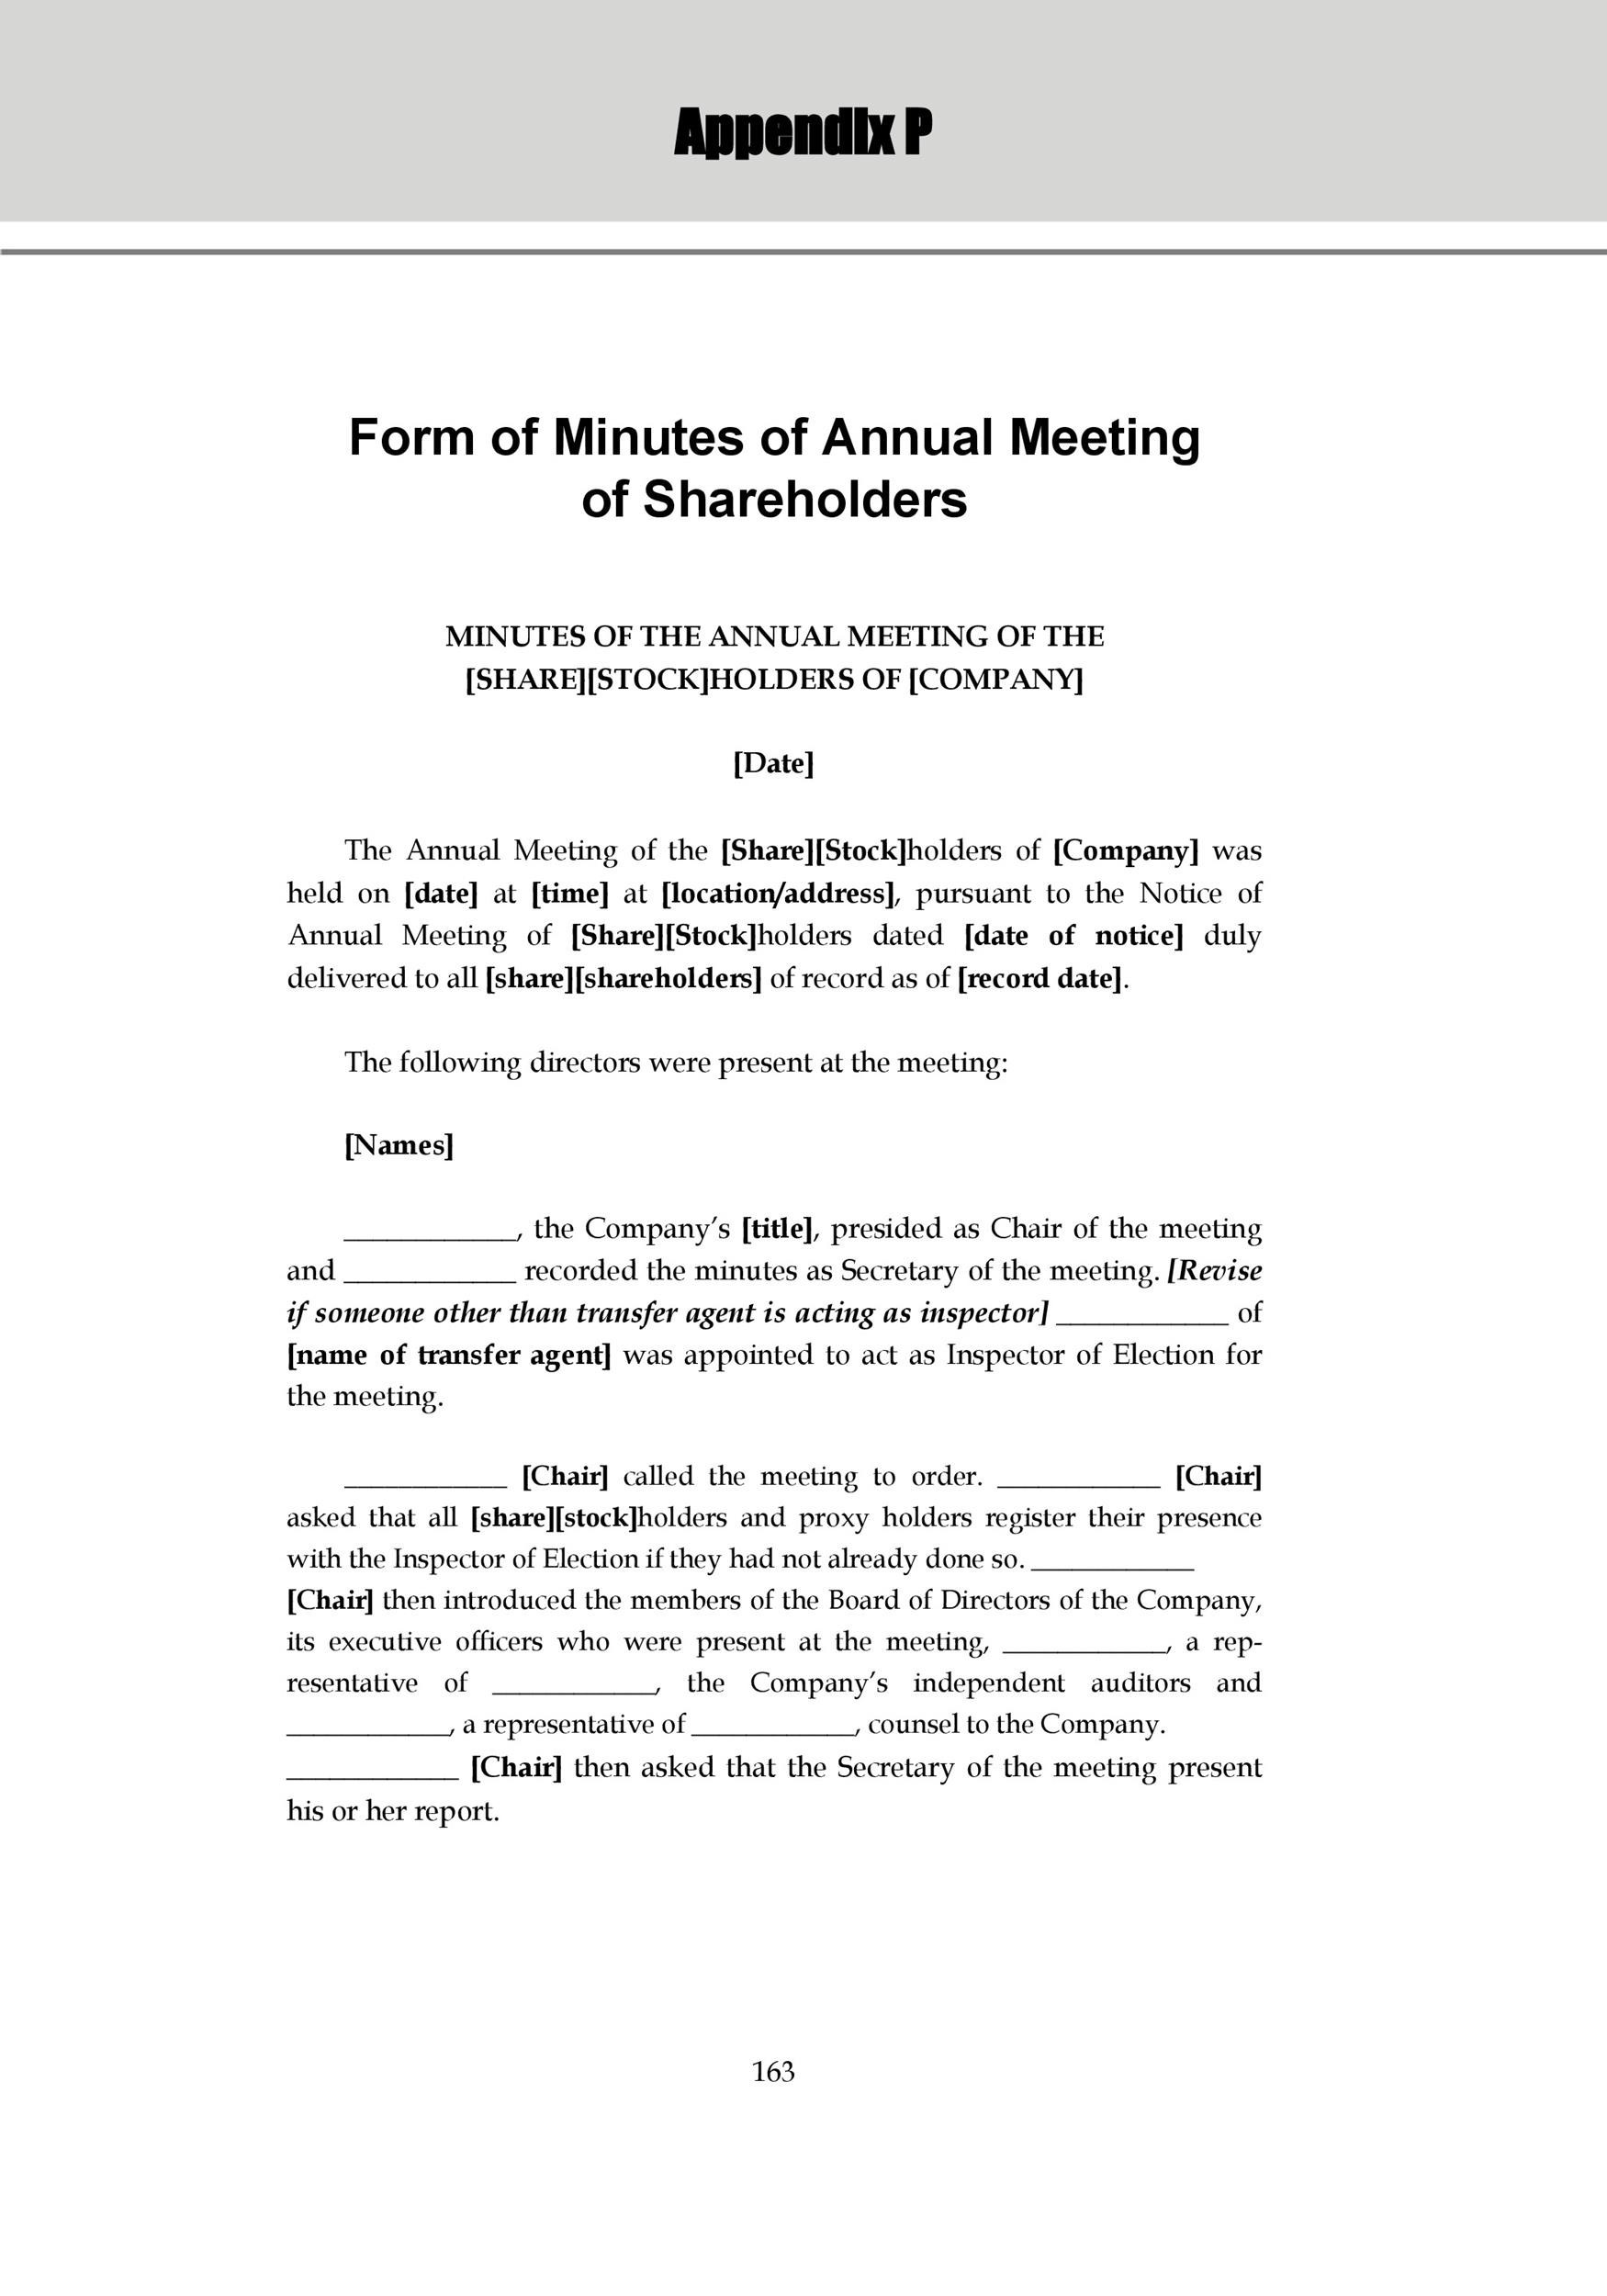 Annual Shareholder Meeting Minutes Template from templatelab.com